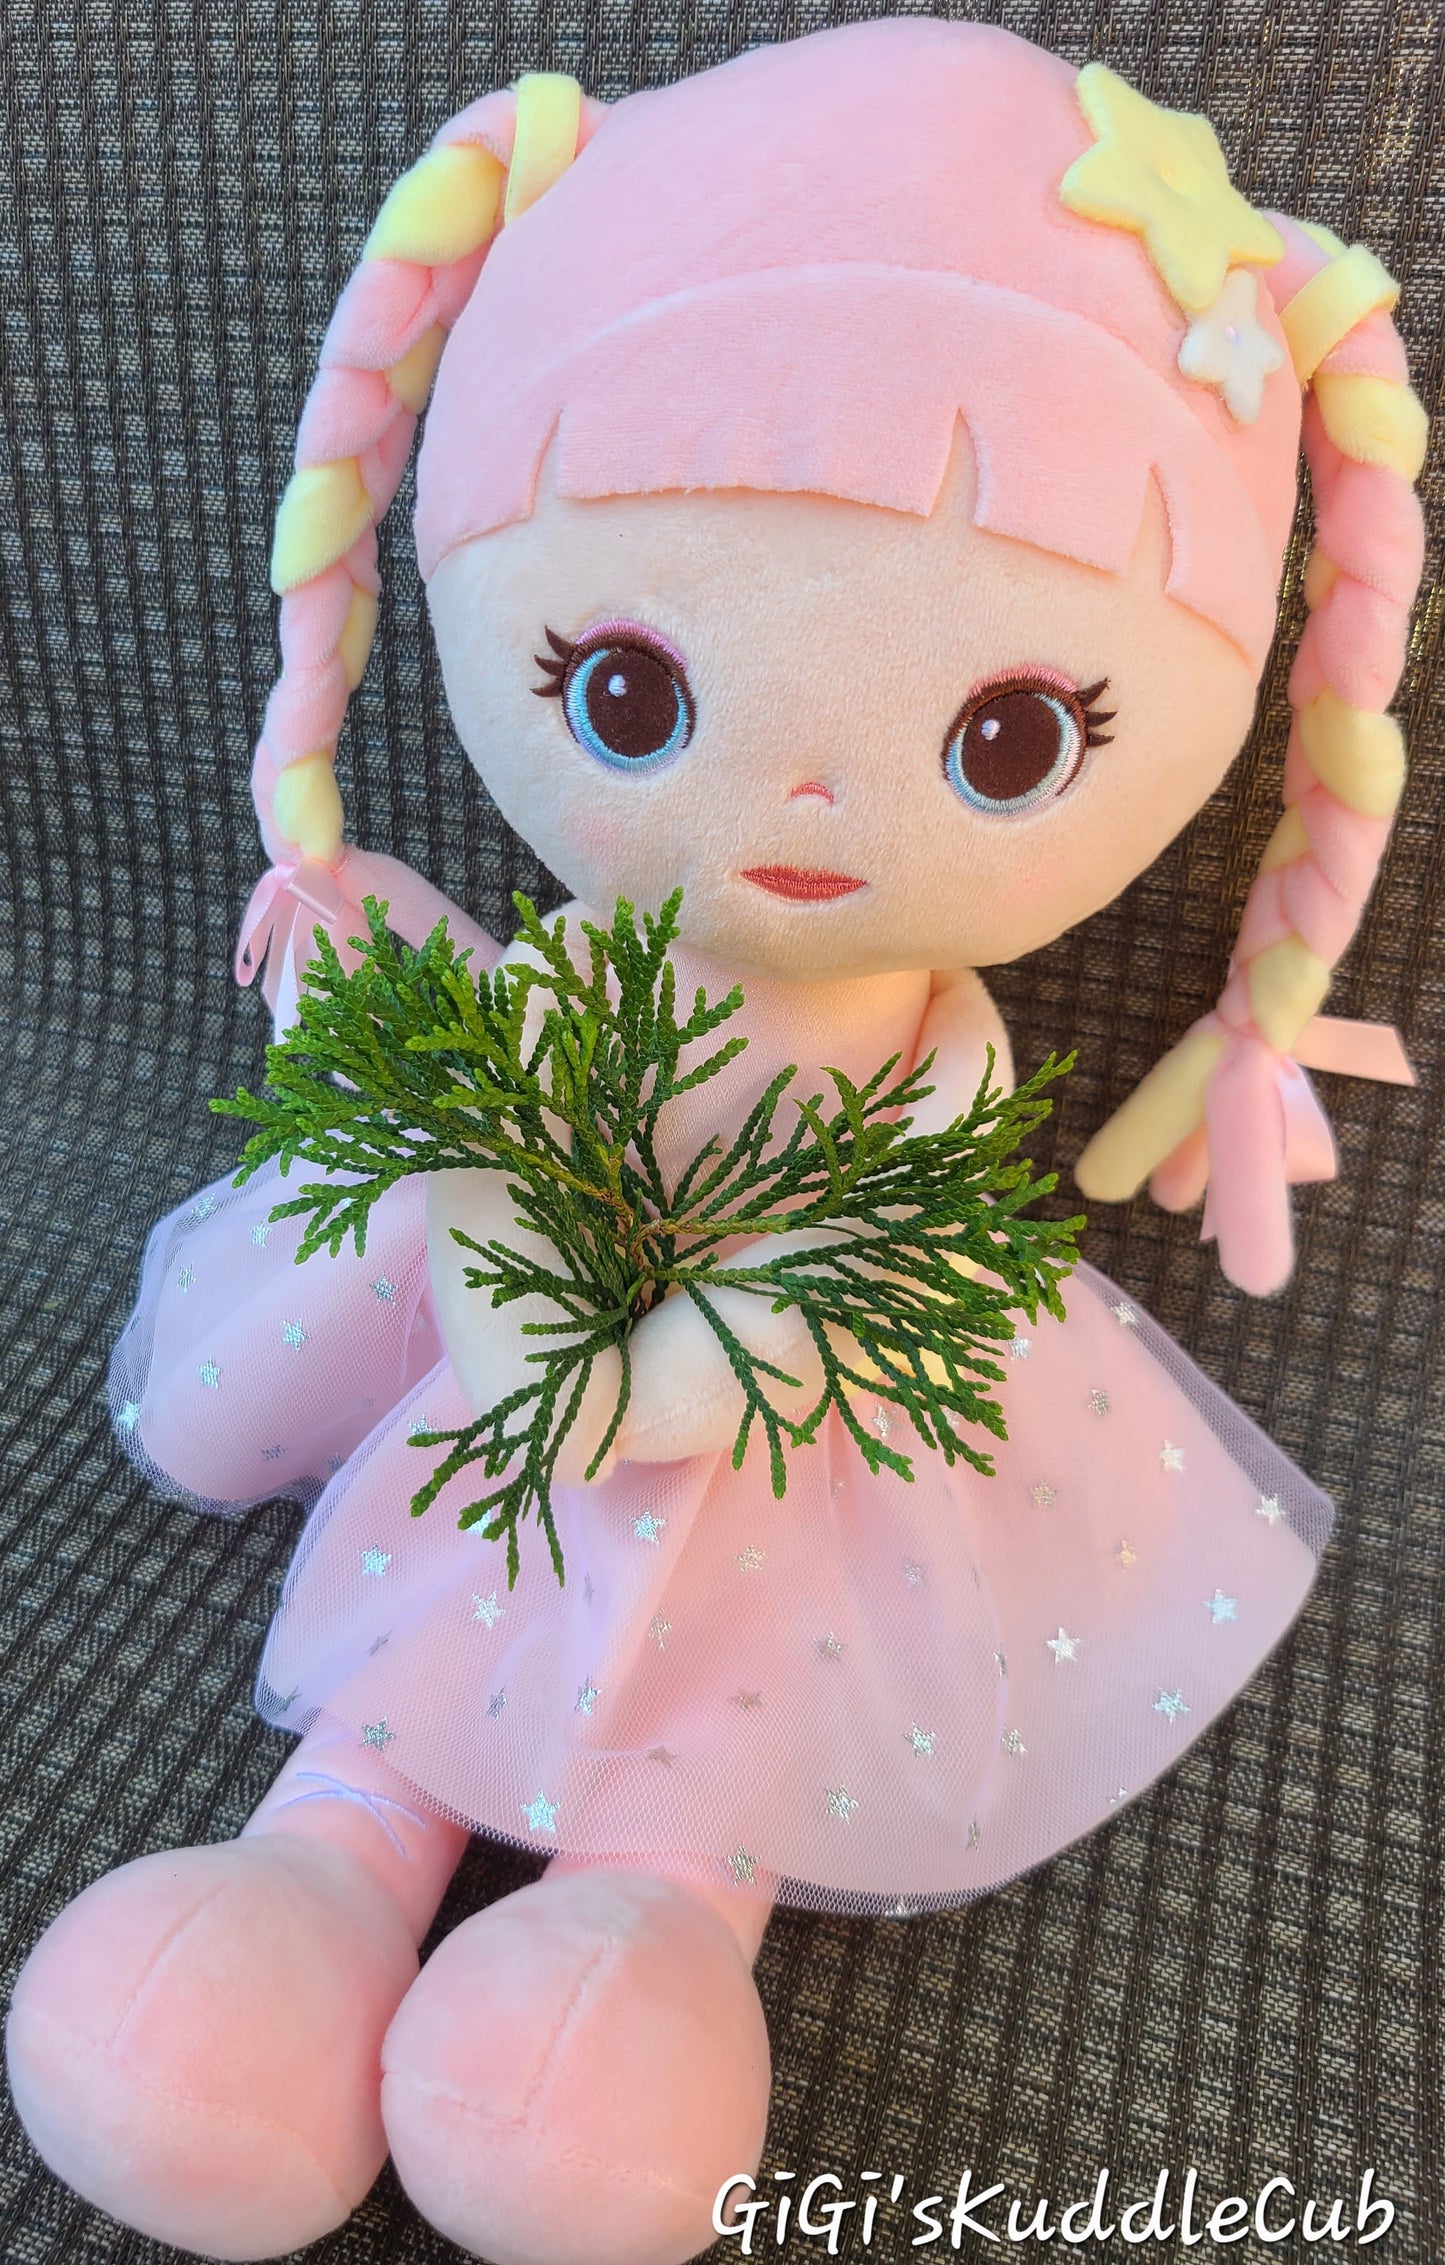 Personalized Soft Rag 16in Star Fairy Baby Girl Plush Doll Toy/ Personalized Baby Gift/Decor/ Handmade Baby Plush Toy